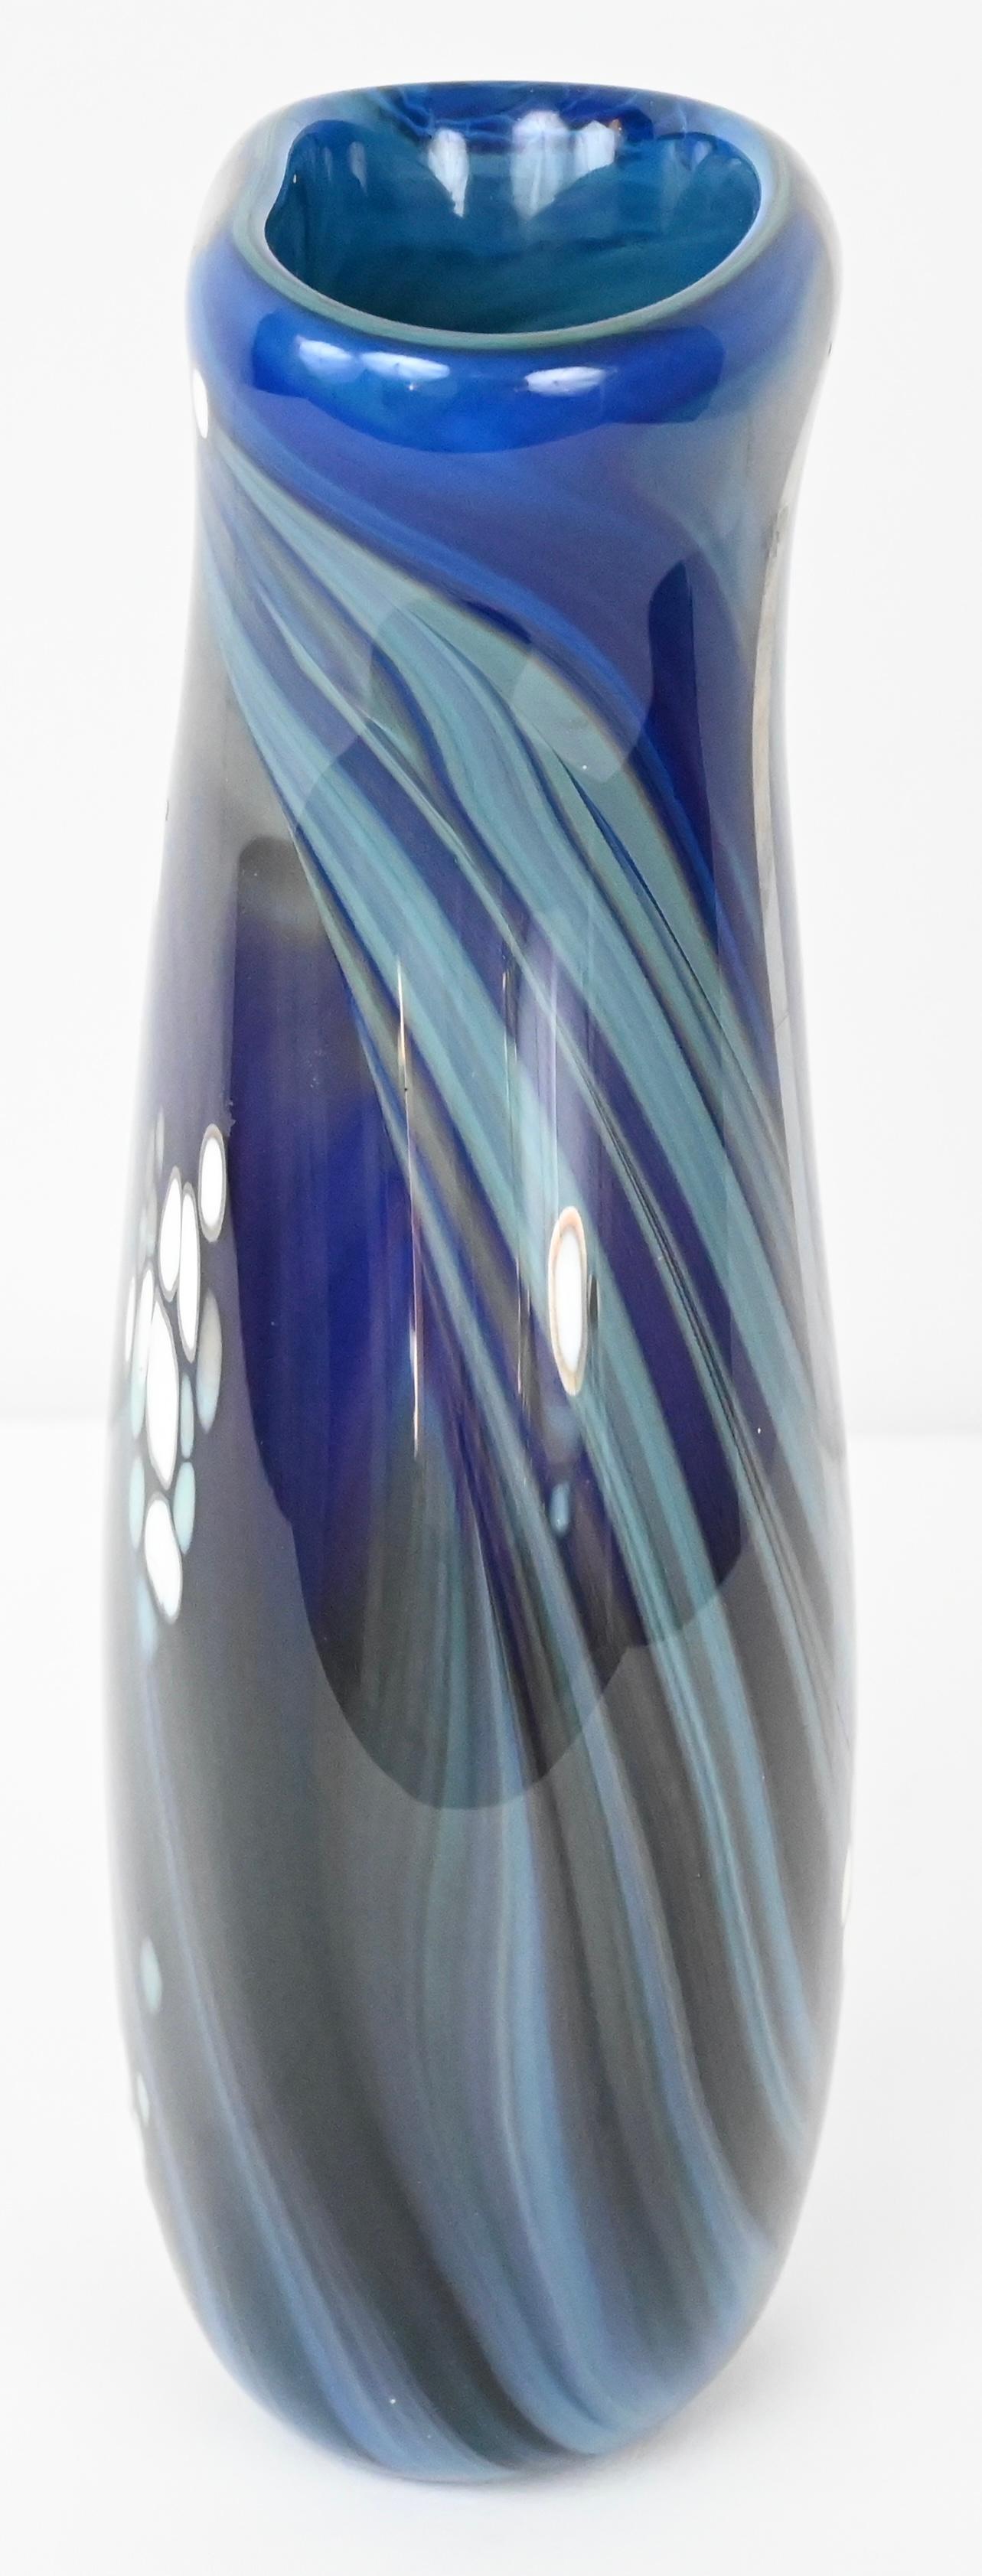 Hand-Crafted Mid-Century Art Glass Flower Vase Signed Swispot, Blue and White Art Glass Vase For Sale